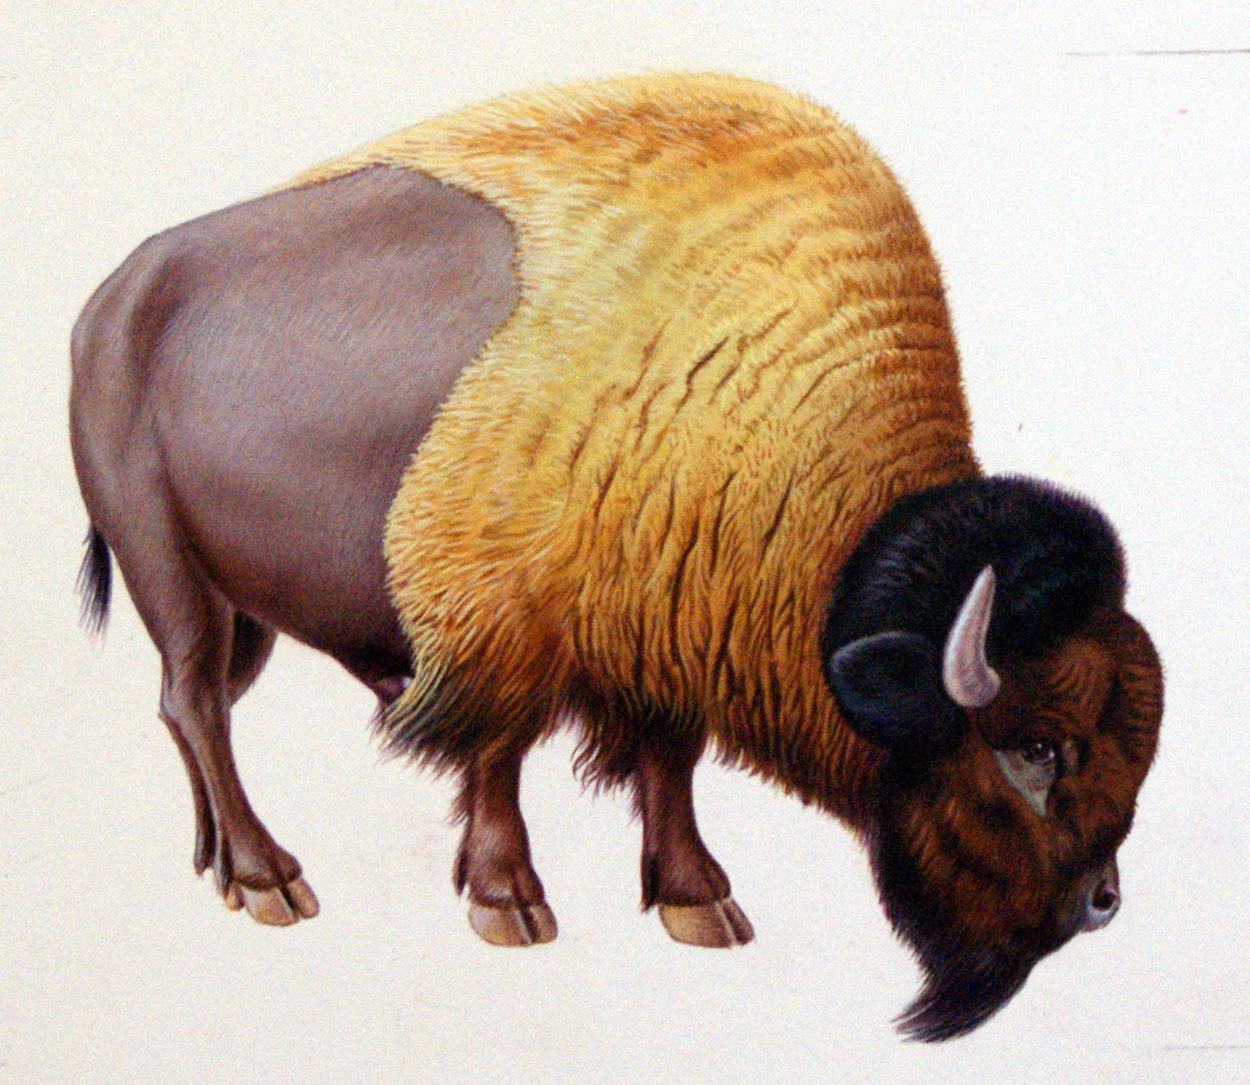 The Bison (Original) art by E Hyde Art at The Illustration Art Gallery